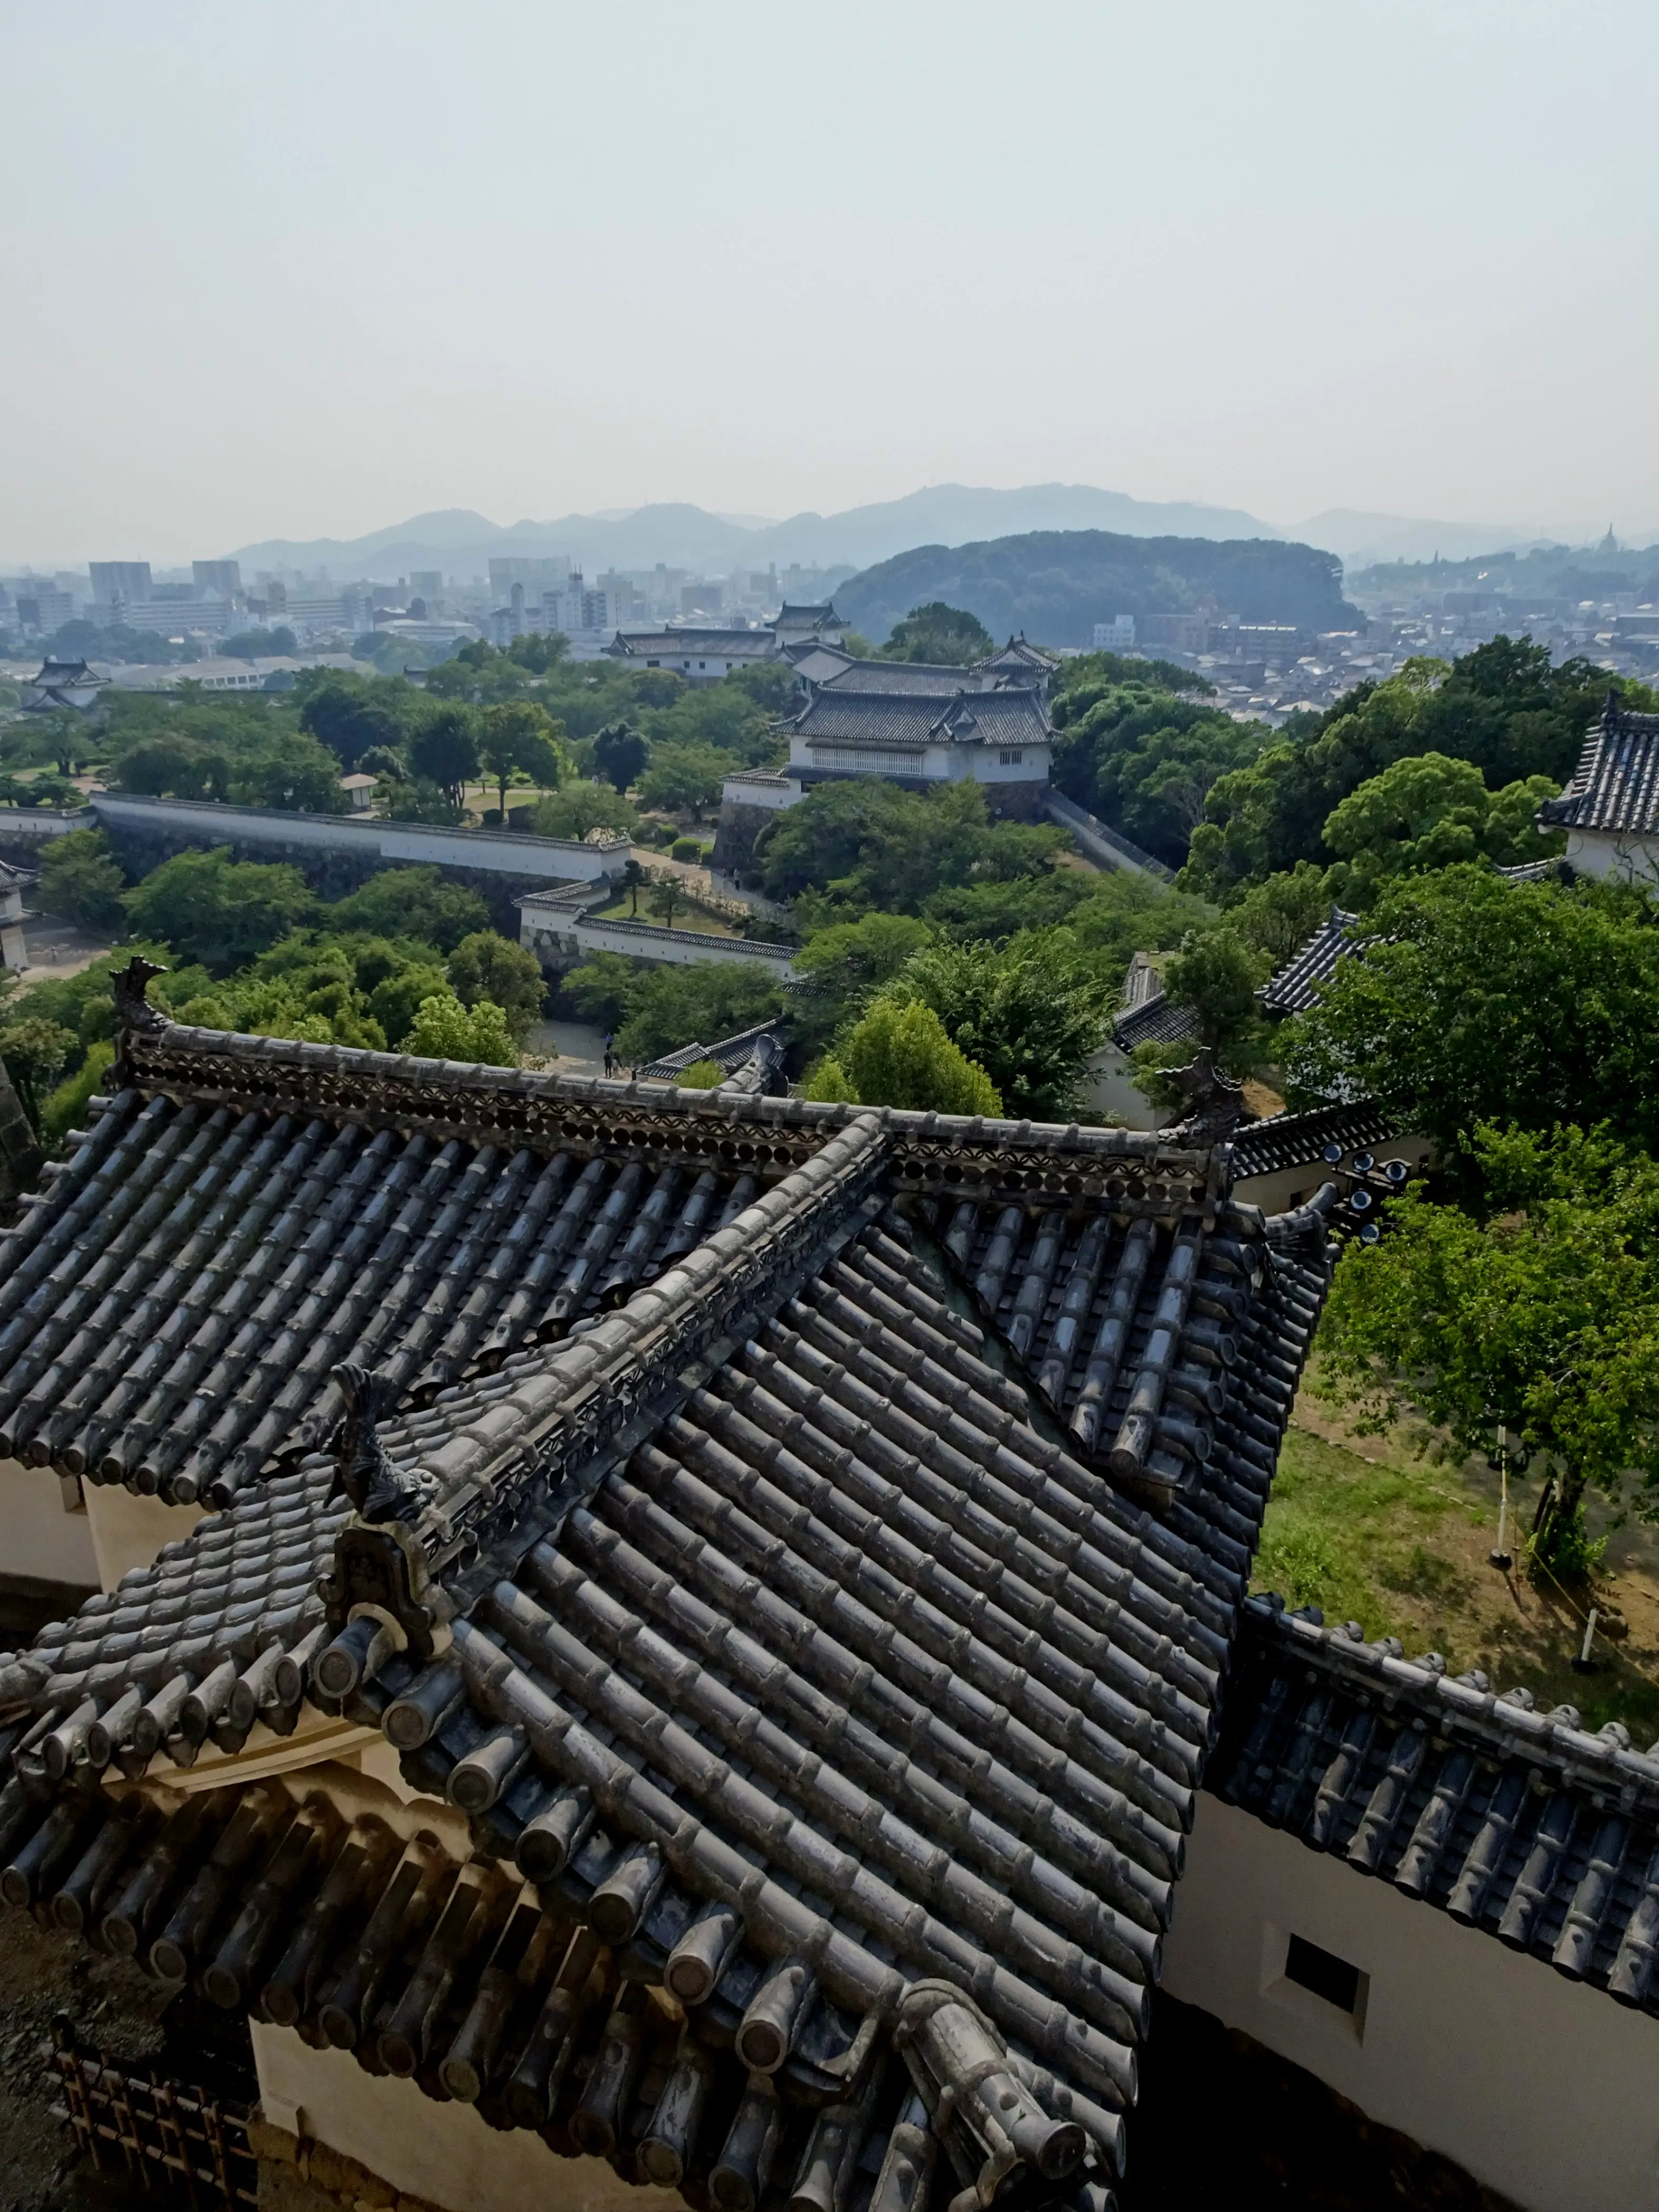 A distant city seen over a garden with glazed roof tiles in the foreground